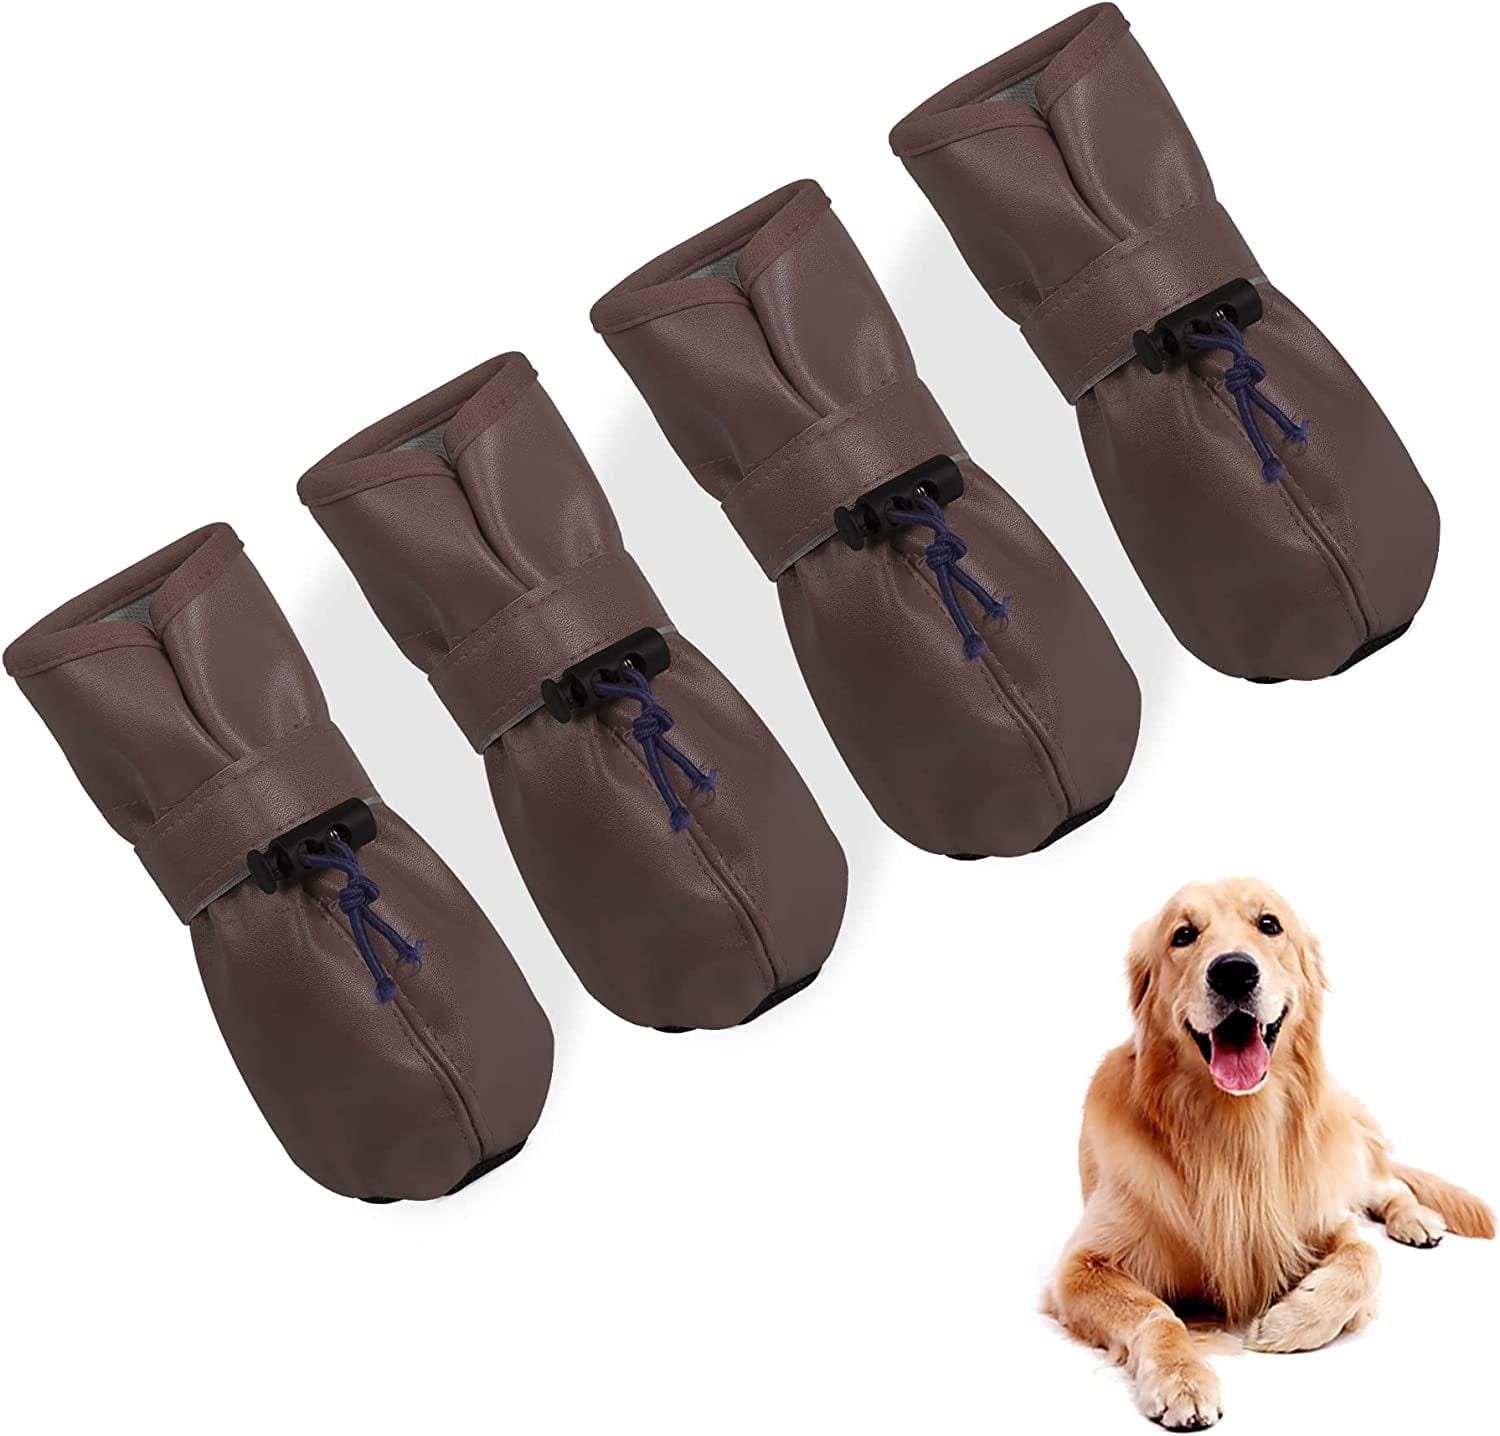 YAODHAOD Dog Shoes for Large Dogs, Dog Boots Paw Protectors for Hot Pavement, Leather Anti-Slip Adjustable Booties,For Indoor Hardwood Floor Traction Control & Outdoor Wlaking Hikin (Size 8, Black) Animals & Pet Supplies > Pet Supplies > Dog Supplies > Dog Apparel YAODHAOD Deep Brown Size 8: 3"x2.5"(L*W) 